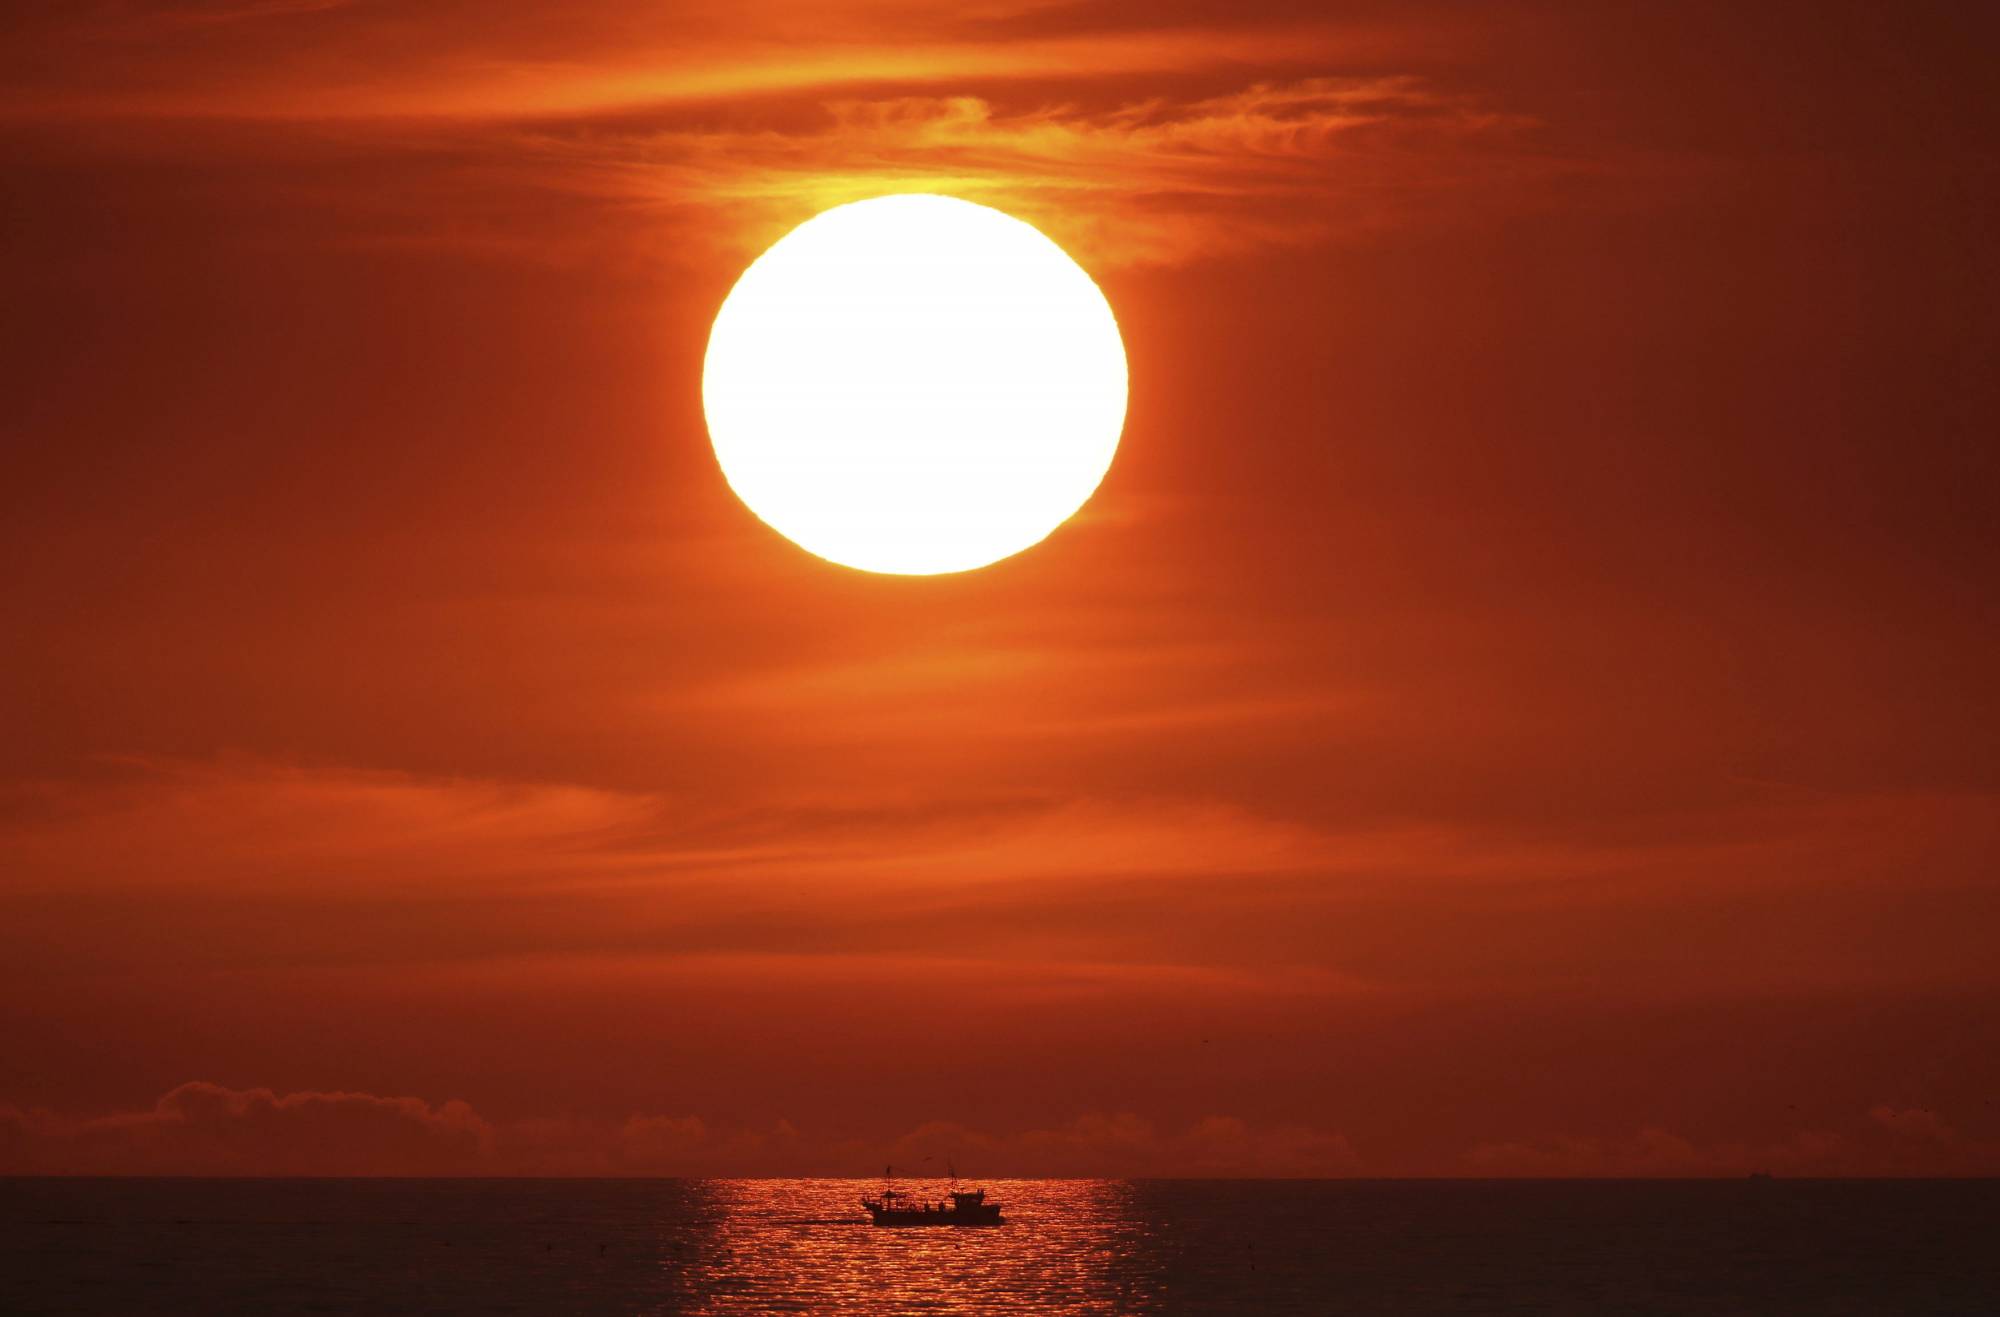 The sun rises at Cullercoats Bay on Engalnd's north east coast, Thursday July 26, 2018. Temperatures are expected to hit 35C (95 Fahrenheit) today as the heatwave continues across the UK. (Owen Humphreys/PA via AP)